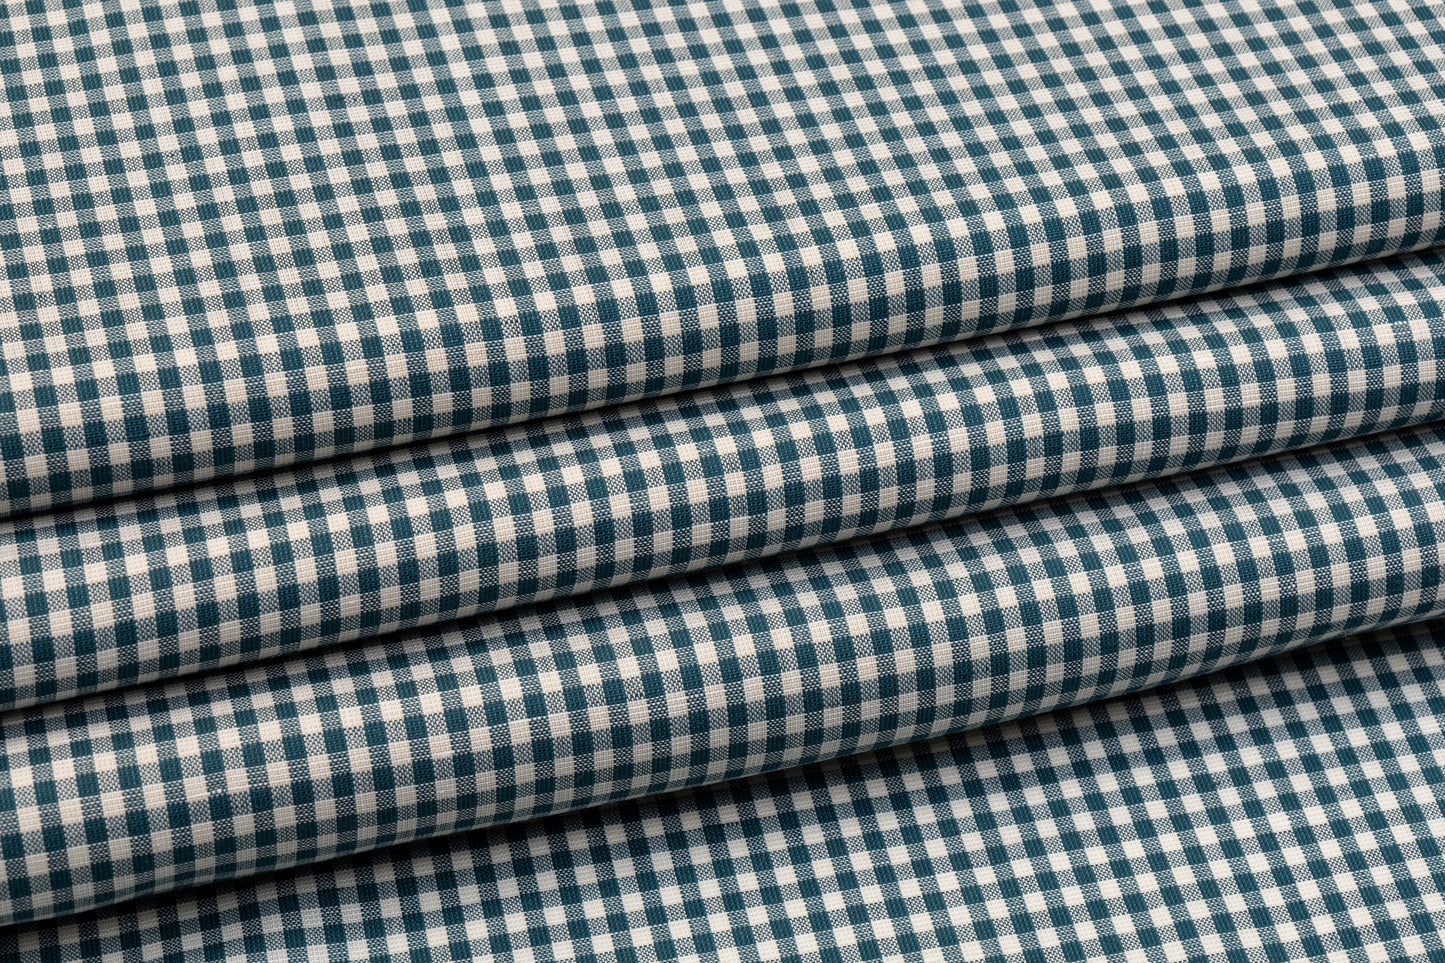 Gingham Check Italian Wool Linen Suiting - Teal and White